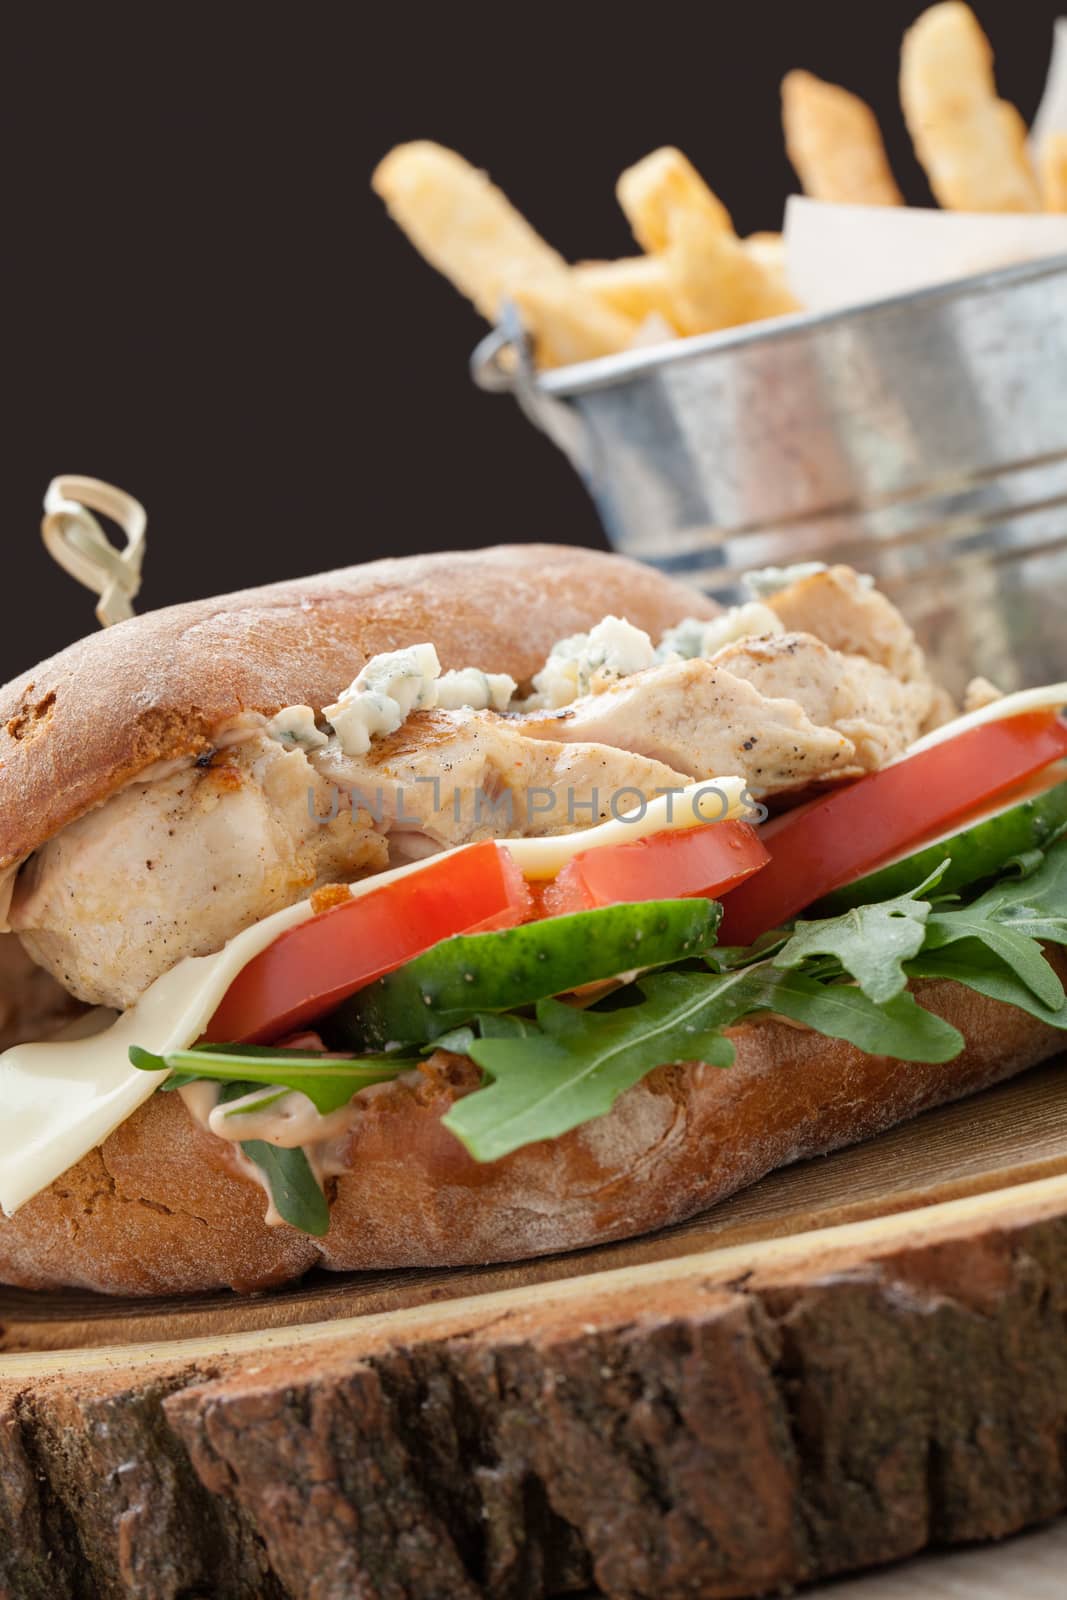 Healthy wheat sandwich burger with BBQ  grilled chicken steak, cheese, tomato, rocket salad, cucumber, fried potato and mustard sauce  served for eating on wooden board